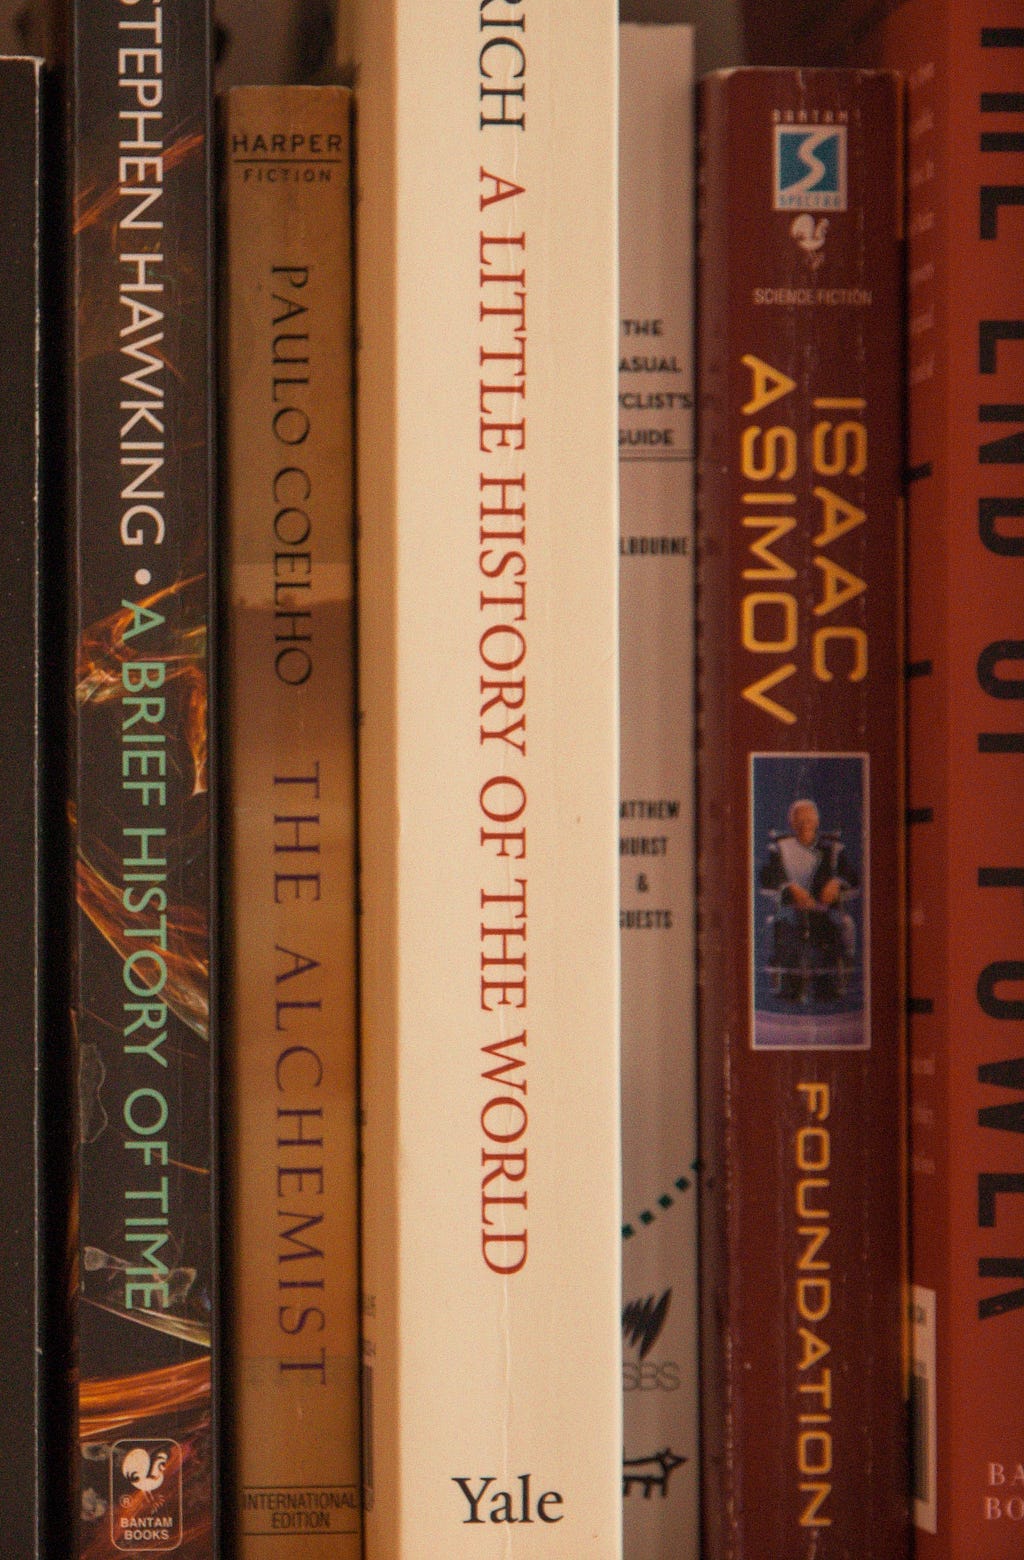 A few good books from Hawking and Asimov. Too lazy to list them all, but I love you, okay?